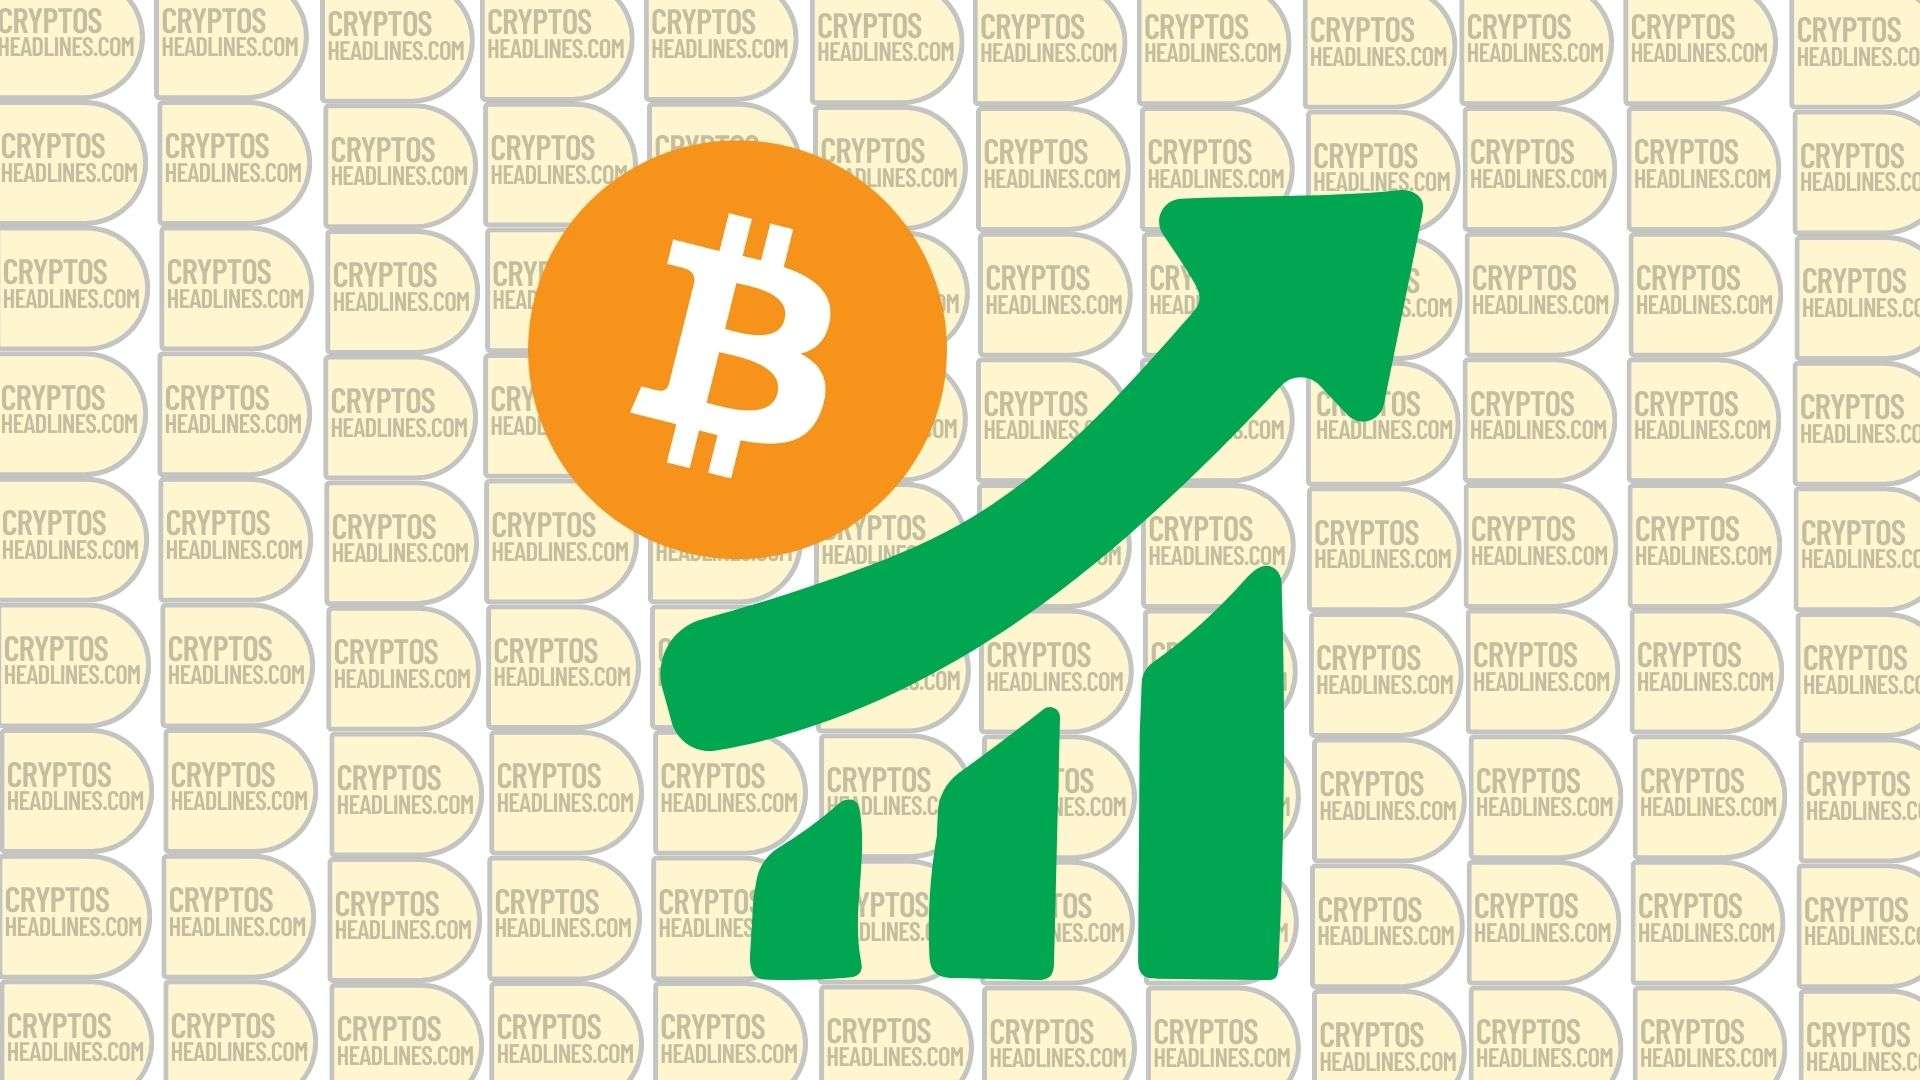 Can Bitcoin Surpass Its All-Time High Before April's Halving?